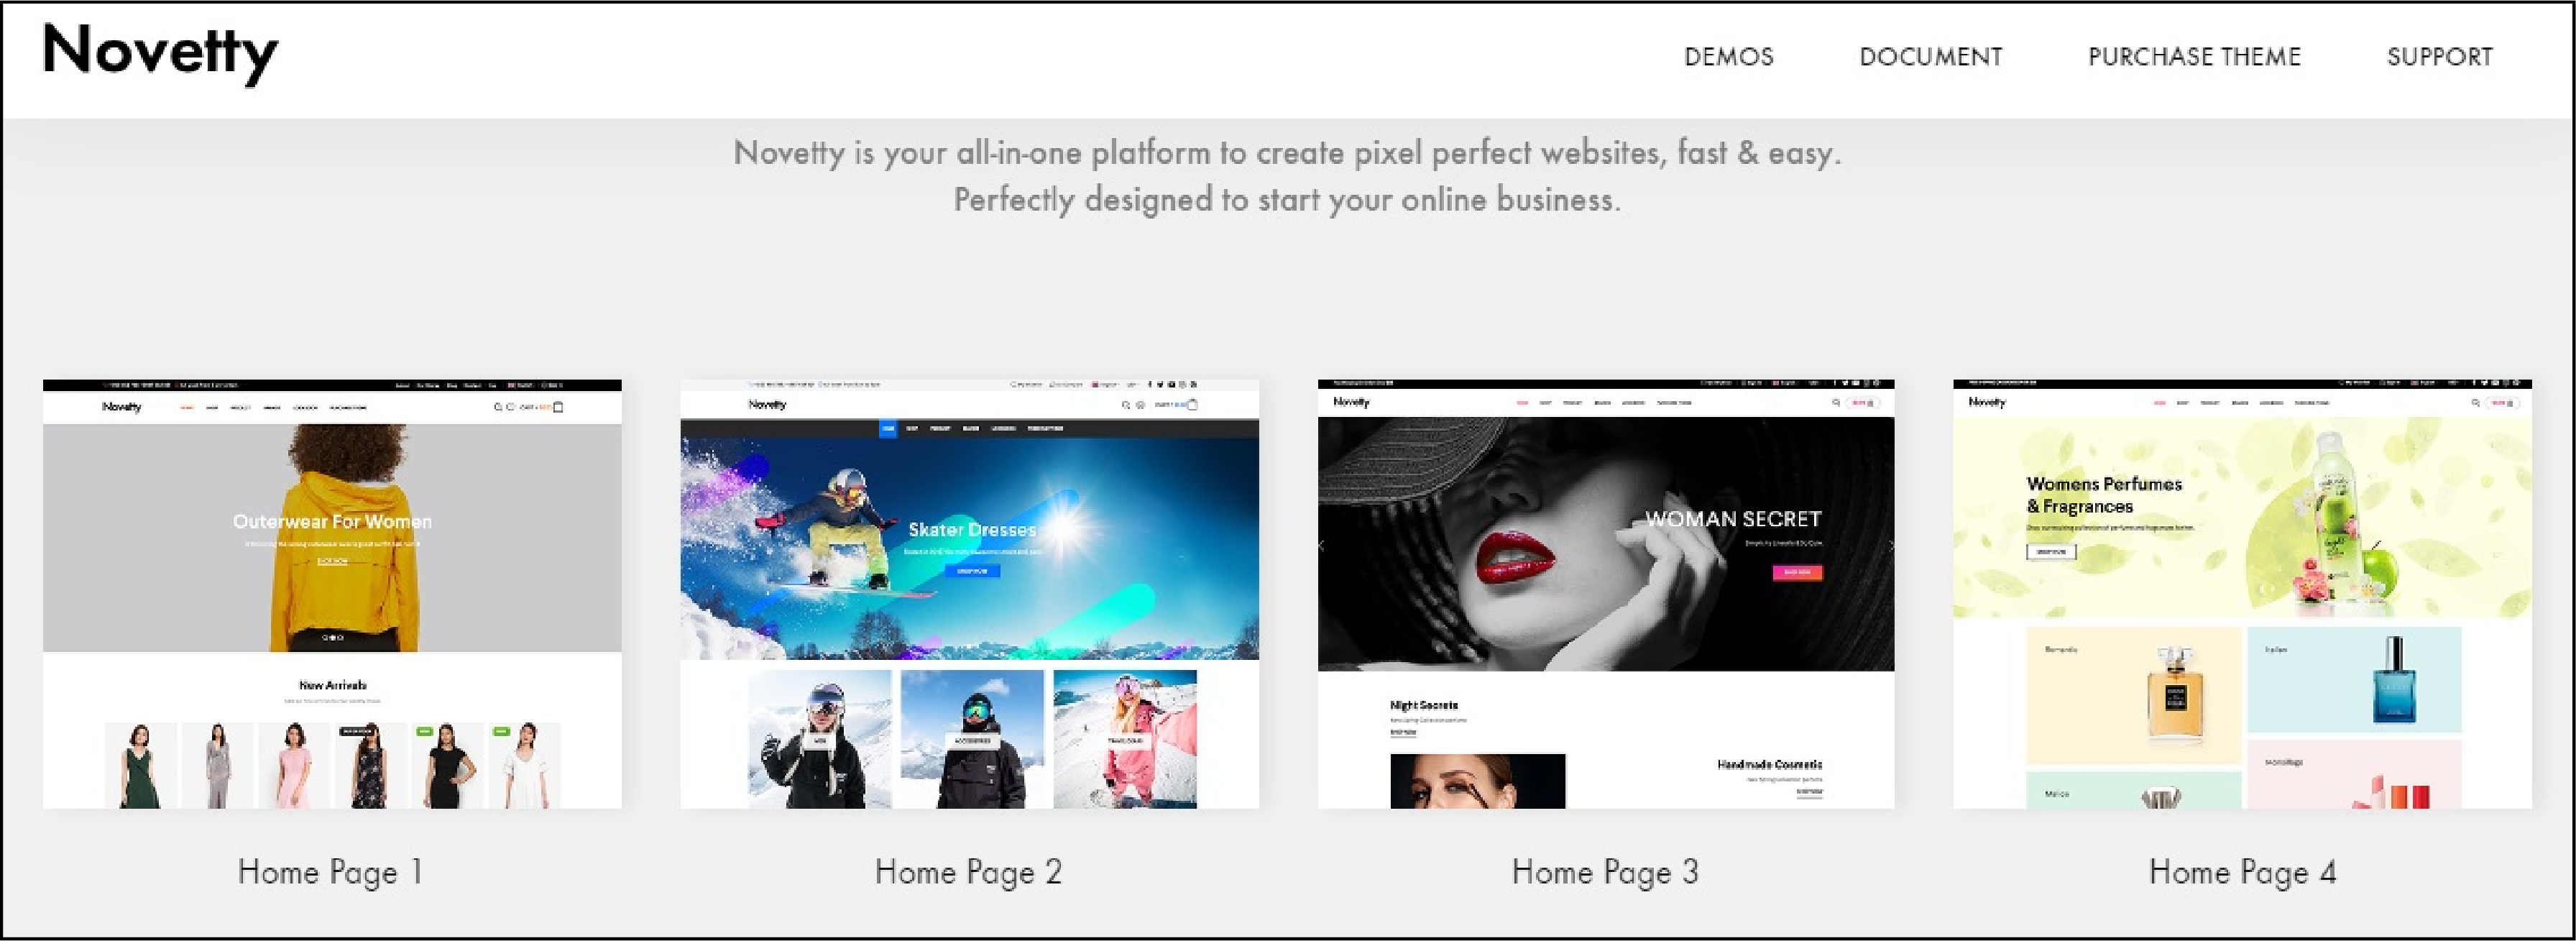 20+ Best Magento Themes and Templates -Novetty